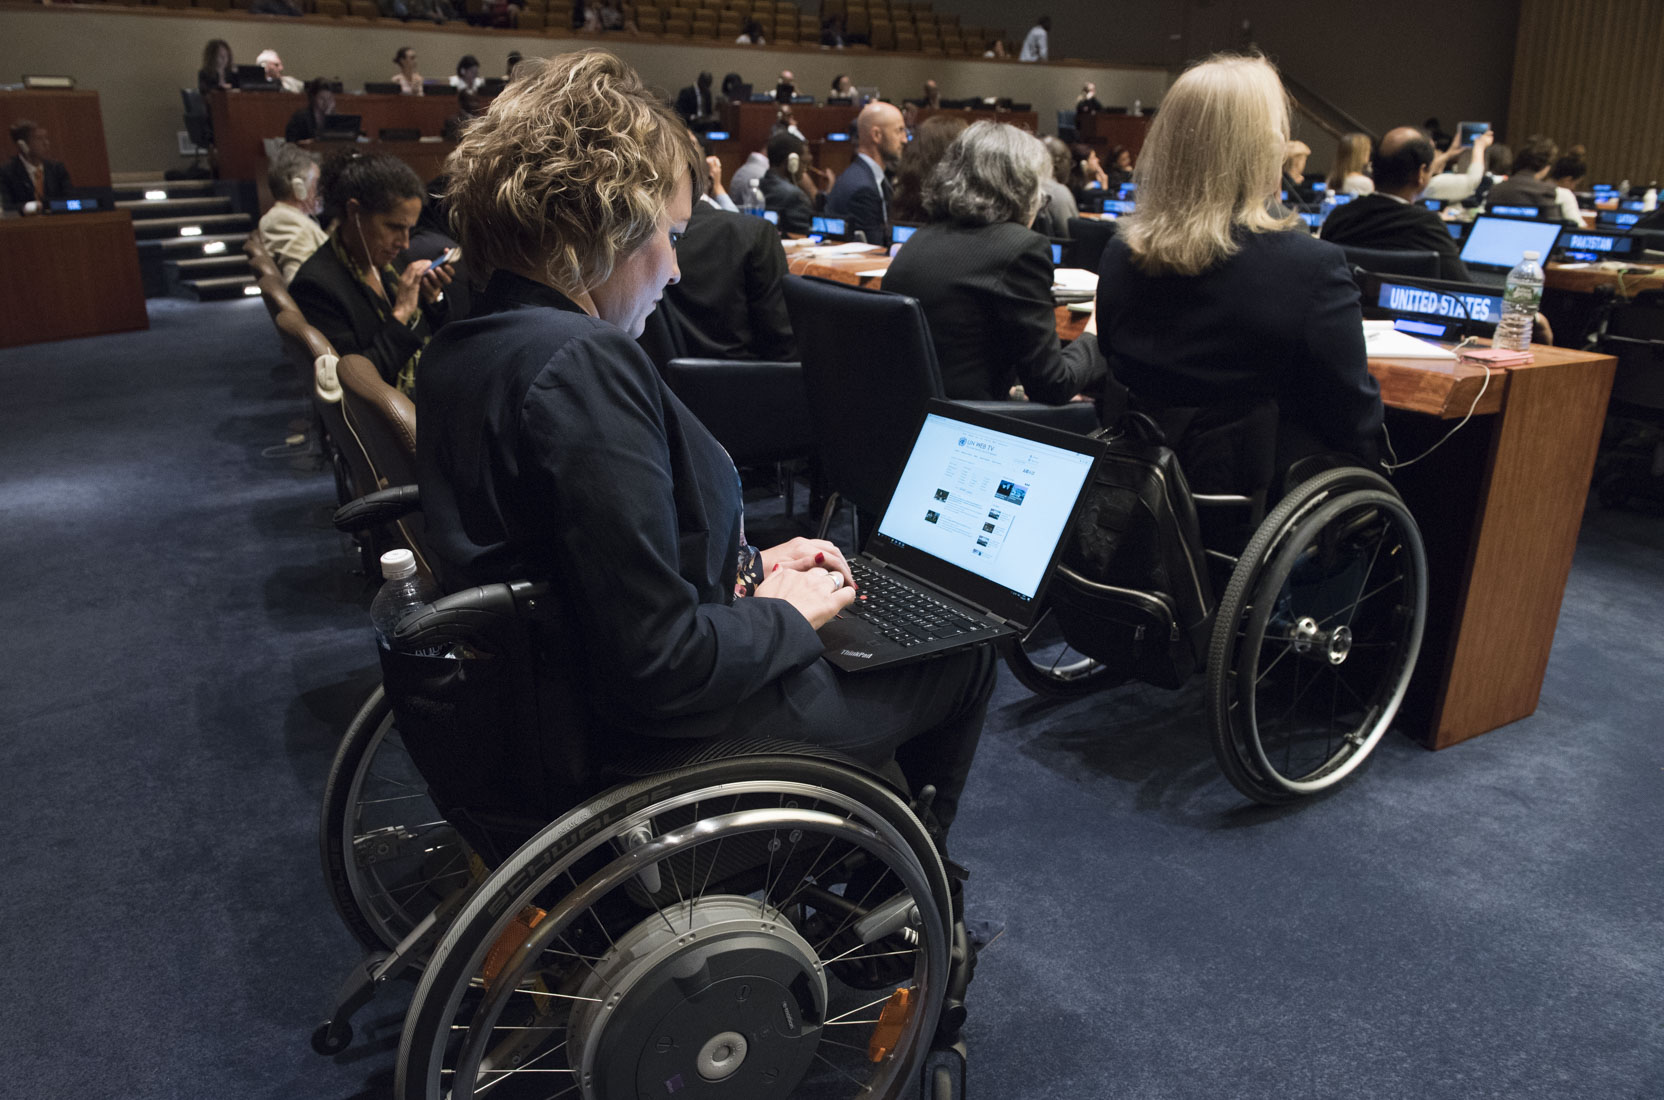 A round-table meeting taking place during the tenth session of the Conference of States Parties to the Convention on the Rights of Persons with Disabilities. United Nations Headquarters, New York, 14 June 2017. UN Photo/Kim Haughton.